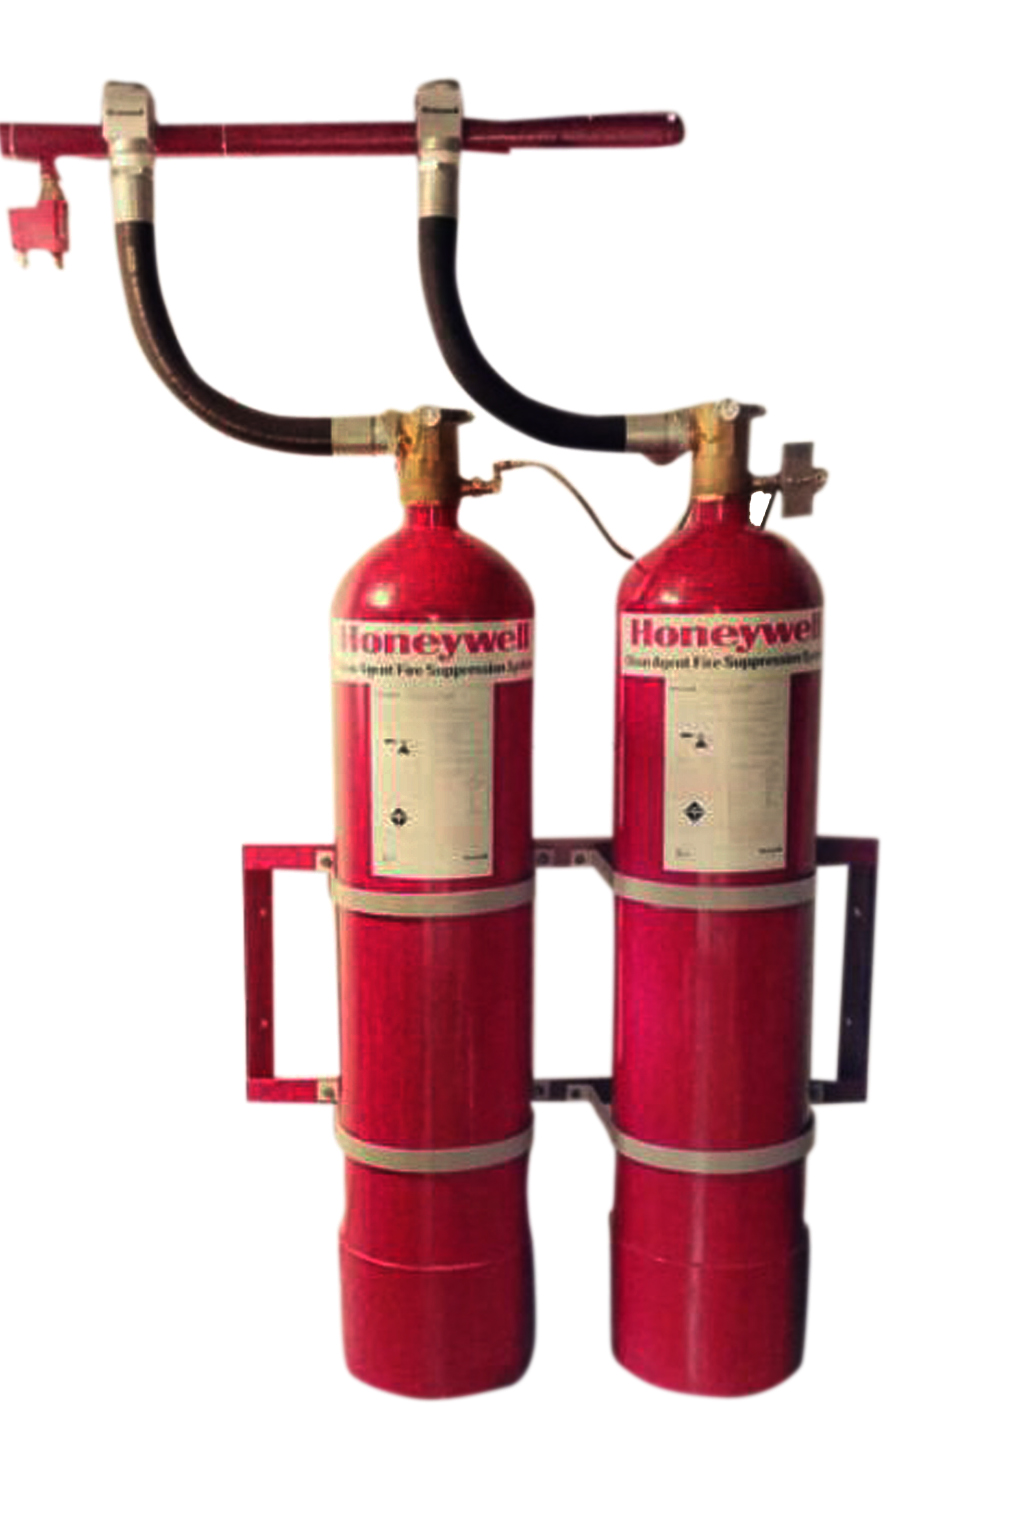 Detail Honeywell Fire Suppression System Nomer 3